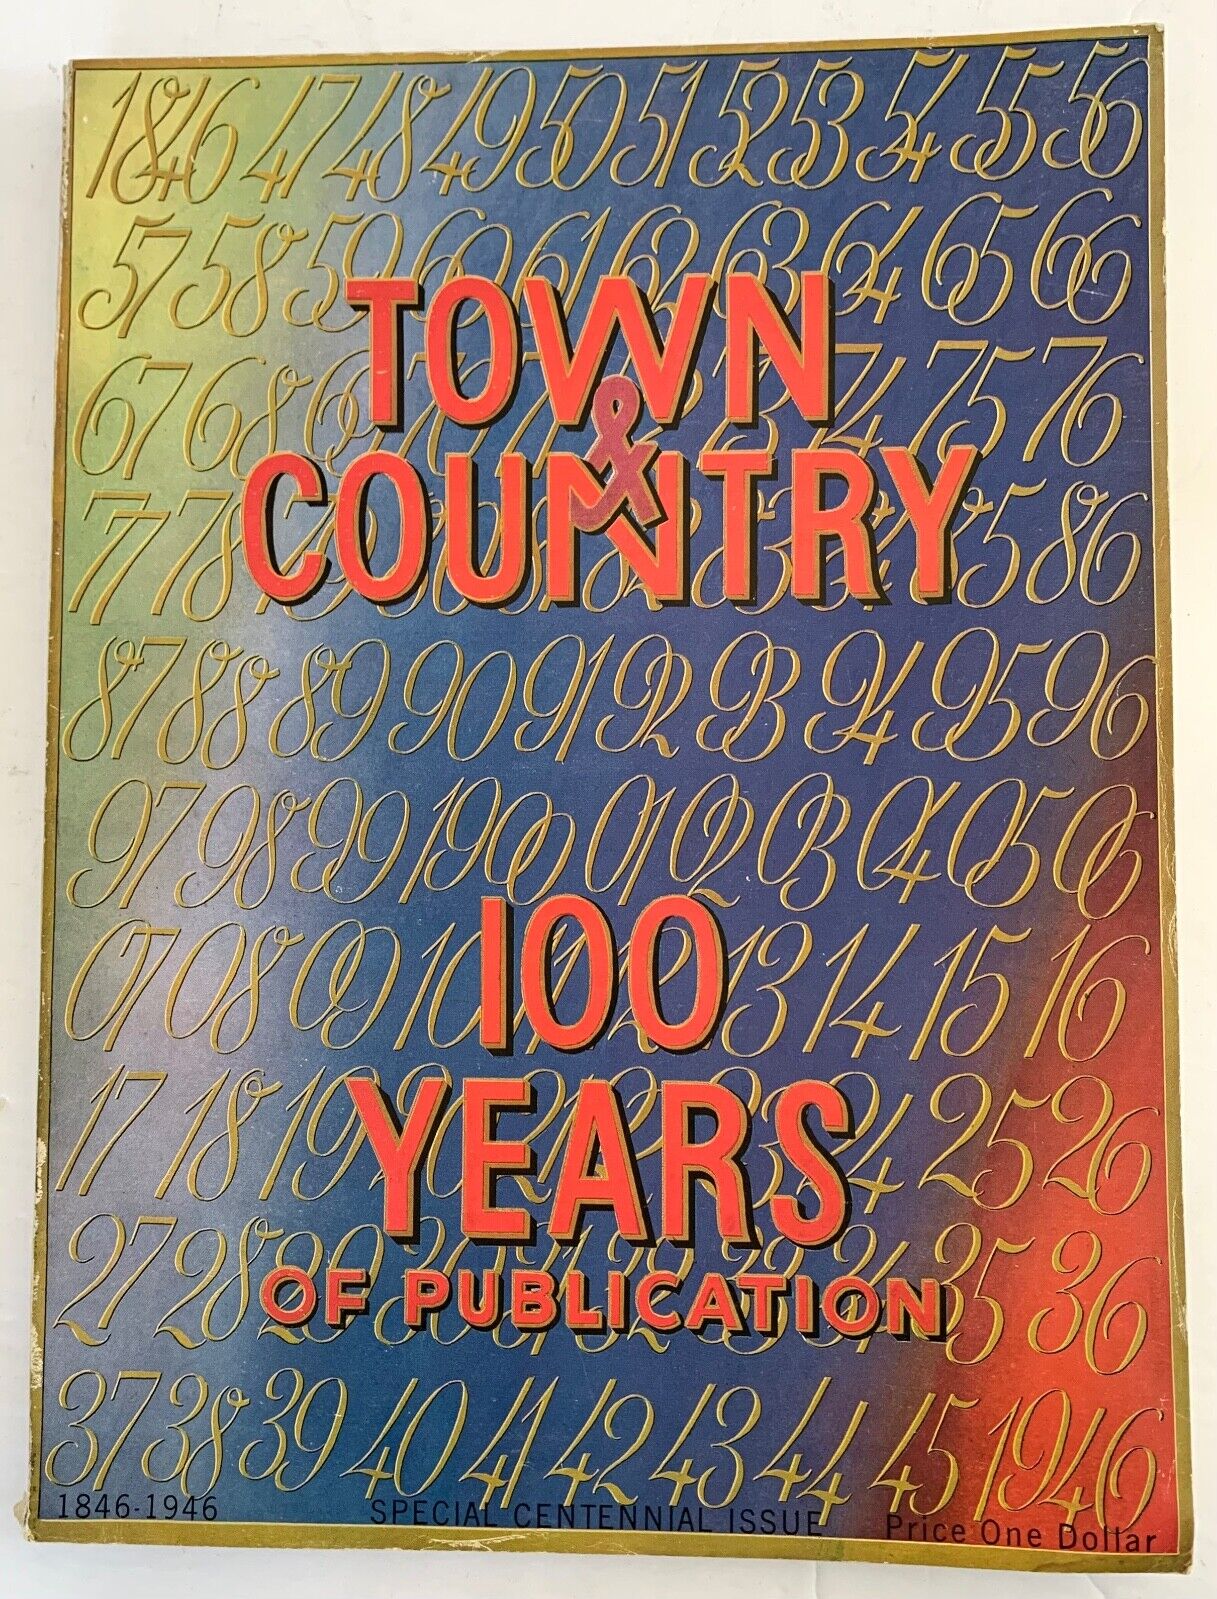 1846-1946 TOWN & COUNTRY Magazine-100 YEARS-Special CENTENNIAL Issue-Great Ads